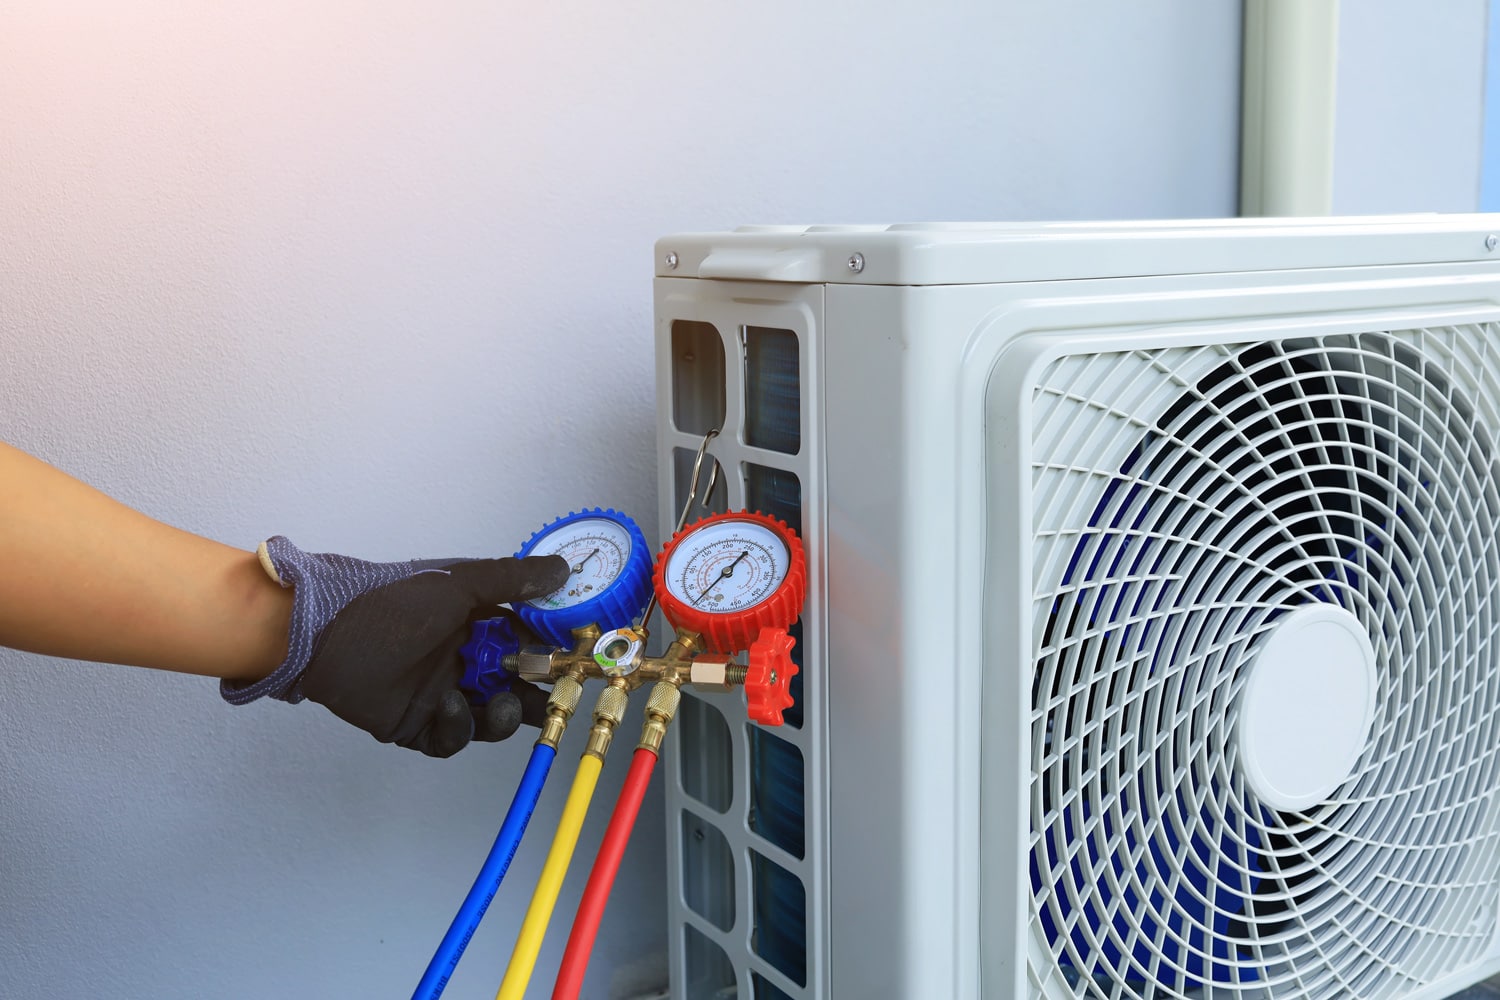 An air conditioner technician's serviceman hand holding a manifold gauge to check the pressure inside the system to normalize the refrigerant charge during high temperatures and hot weather. Maintain.